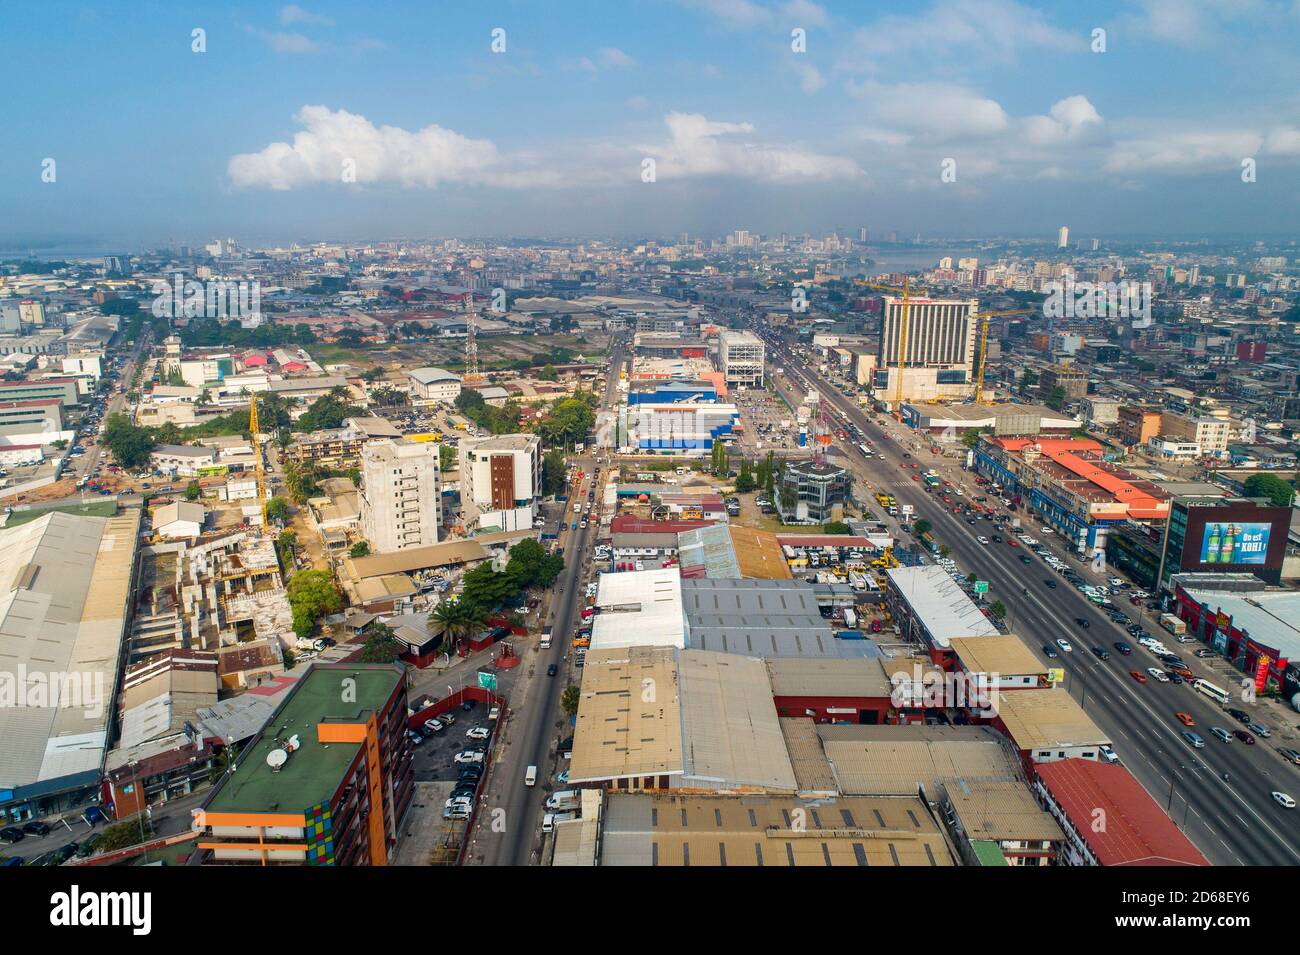 Cote d'Ivoire (Ivory Coast), Abidjan: aerial view of the district of Marcory Potopoto along Boulevard Valery Giscard d'Estaing Stock Photo